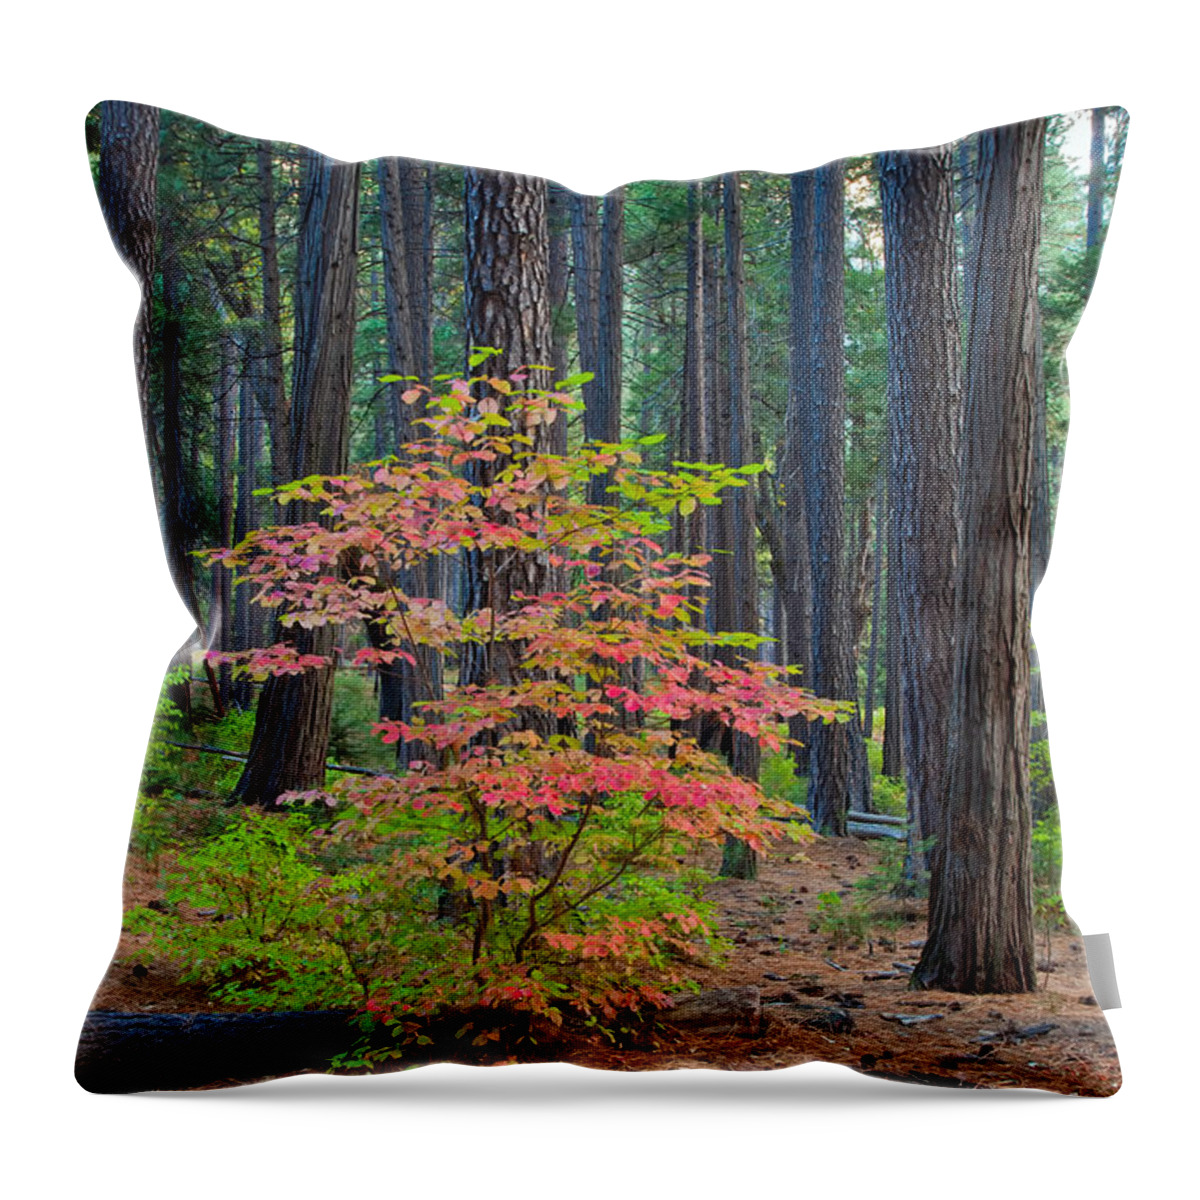 Landscape Throw Pillow featuring the photograph Majestic by Jonathan Nguyen